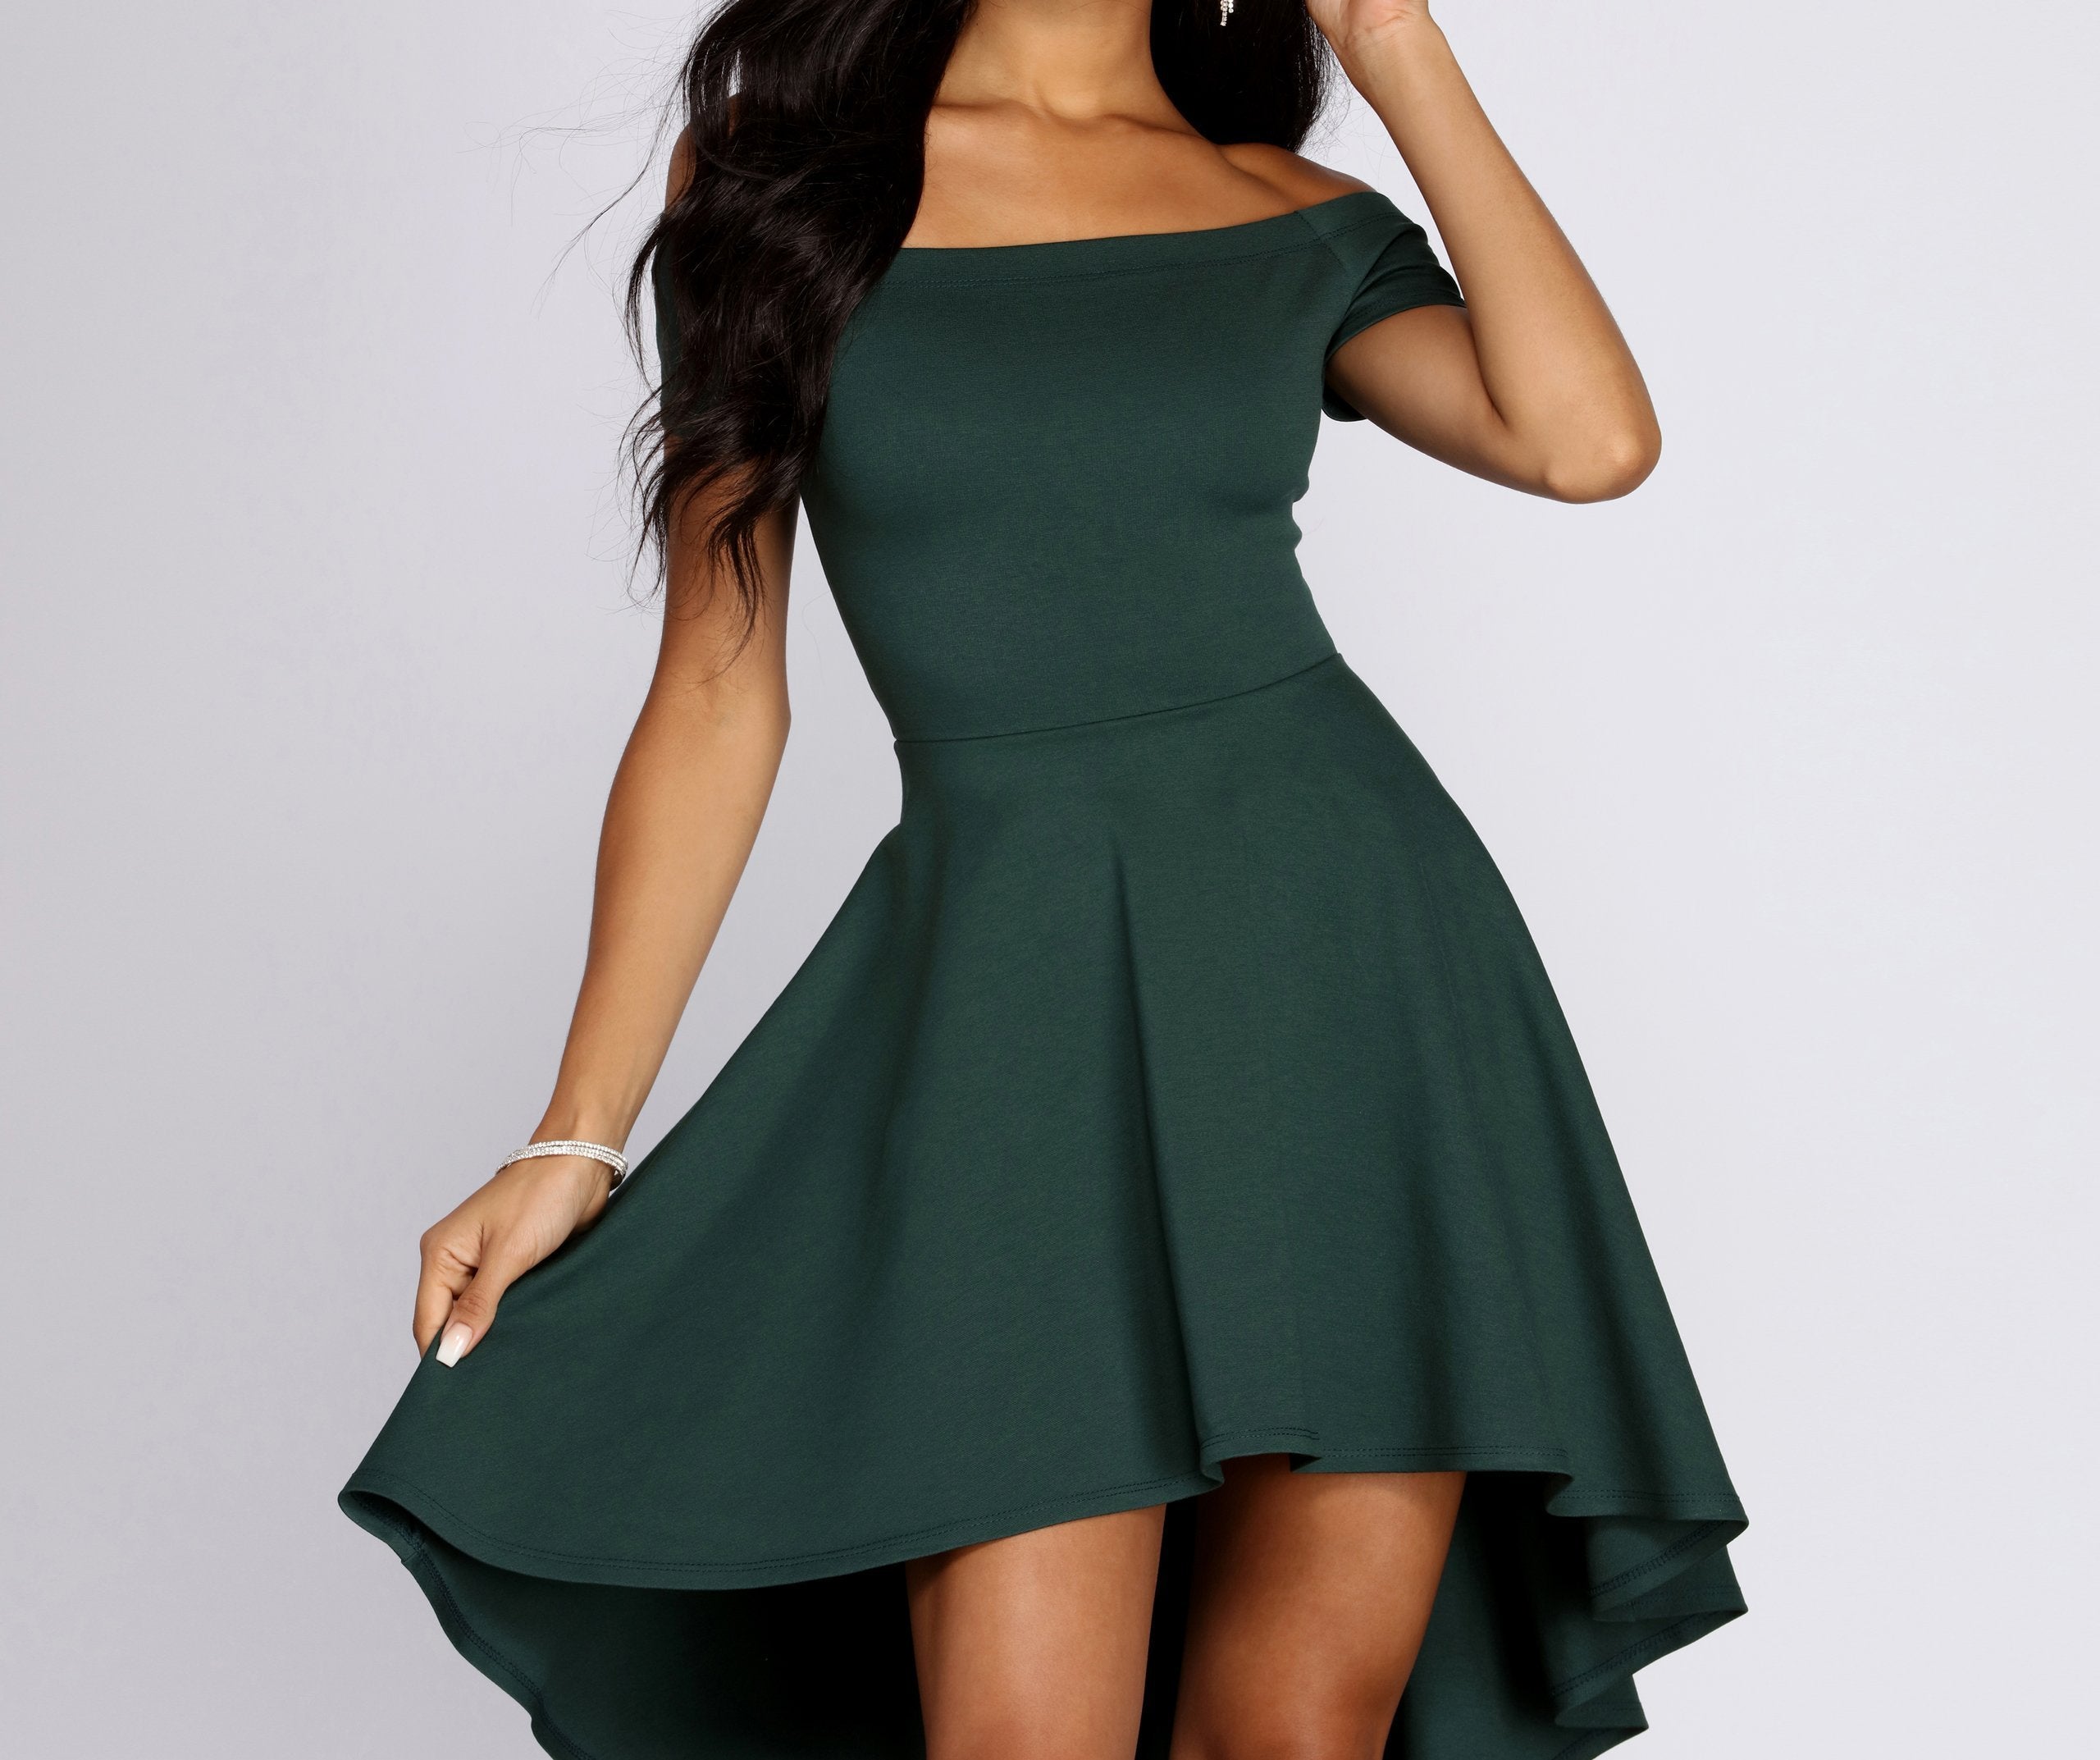 All The Rage Skater Dress - Lady Occasions